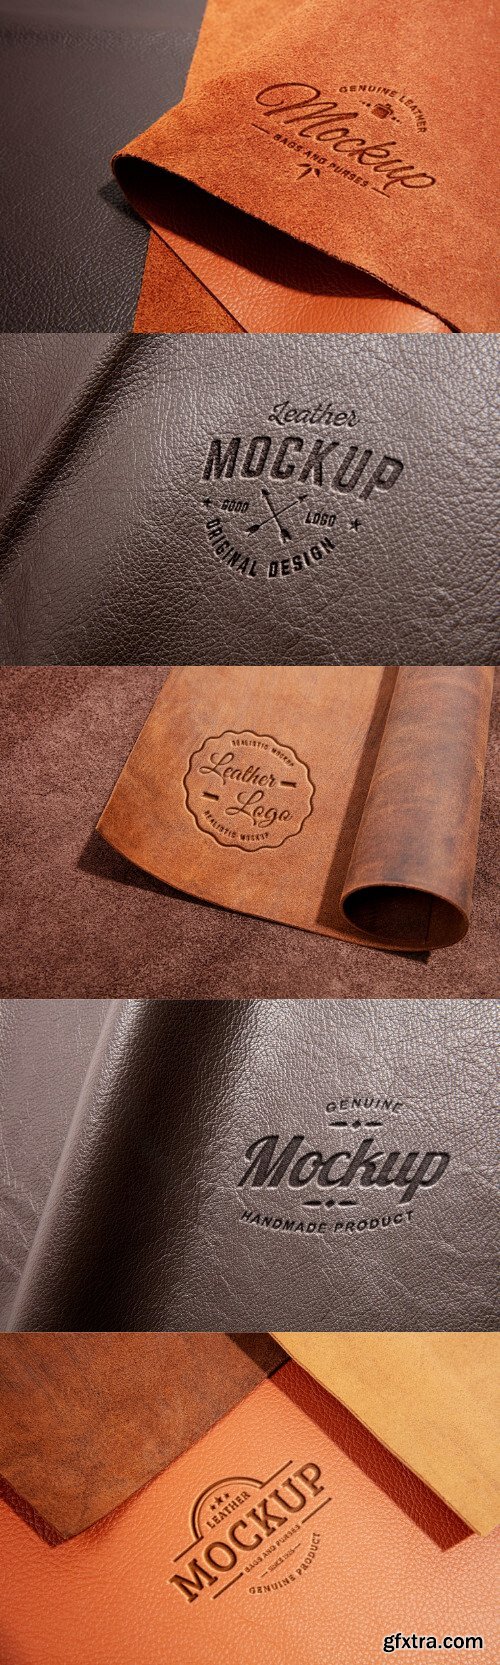 Logo mock-up effect on leather material